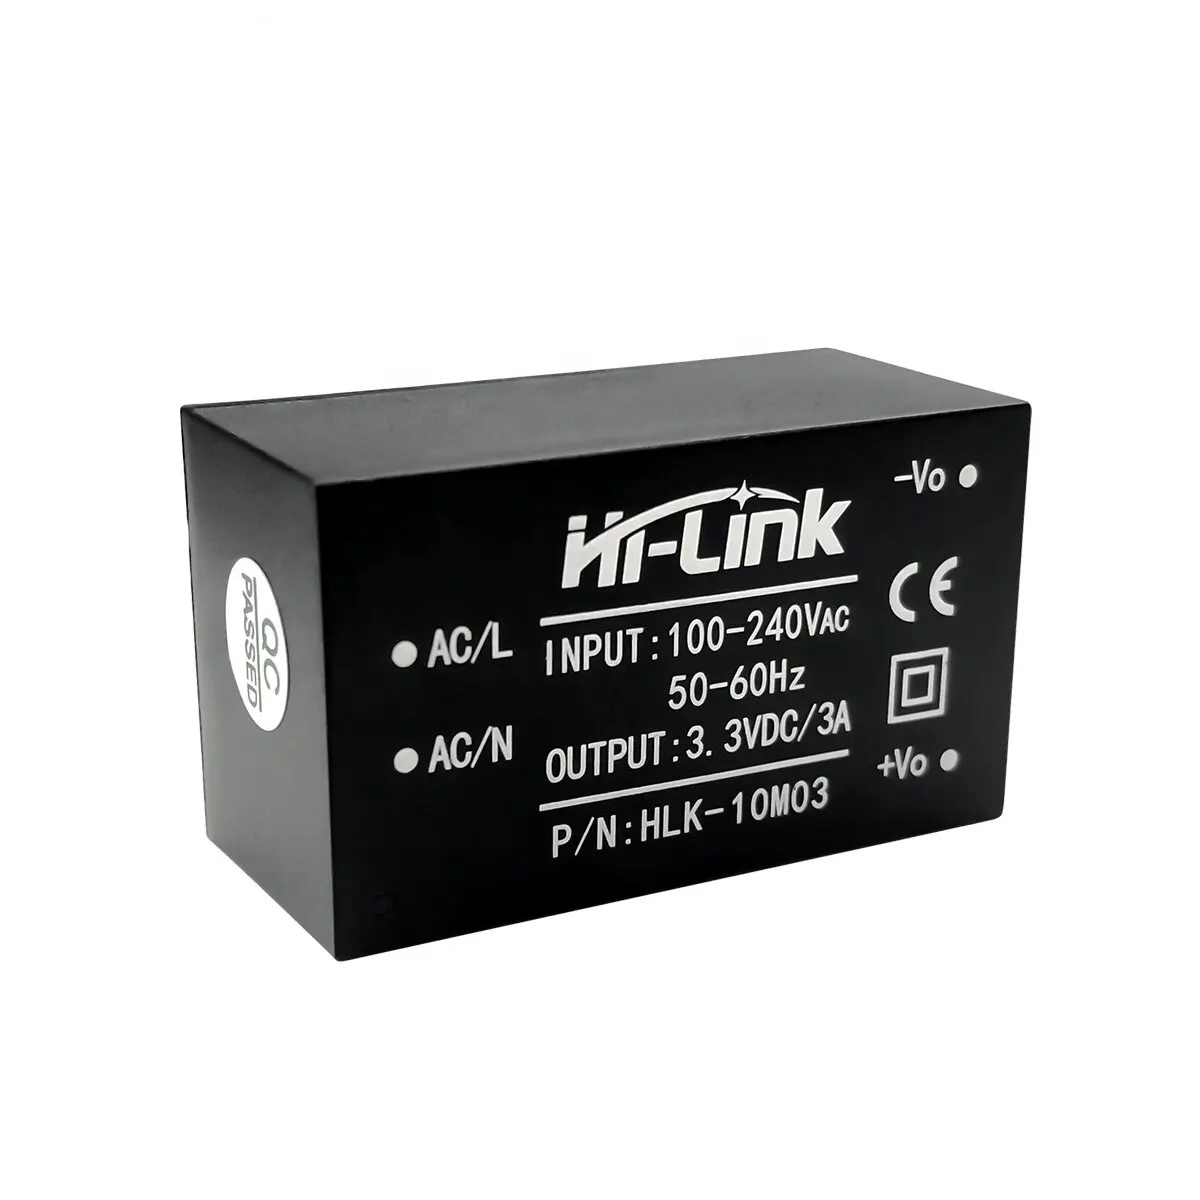 Hi-Link HLK-10M03 3.3V 10W AC-DC Isolated Step-Down Switching Power Supply Module AC-DC Converter HLK-10M03